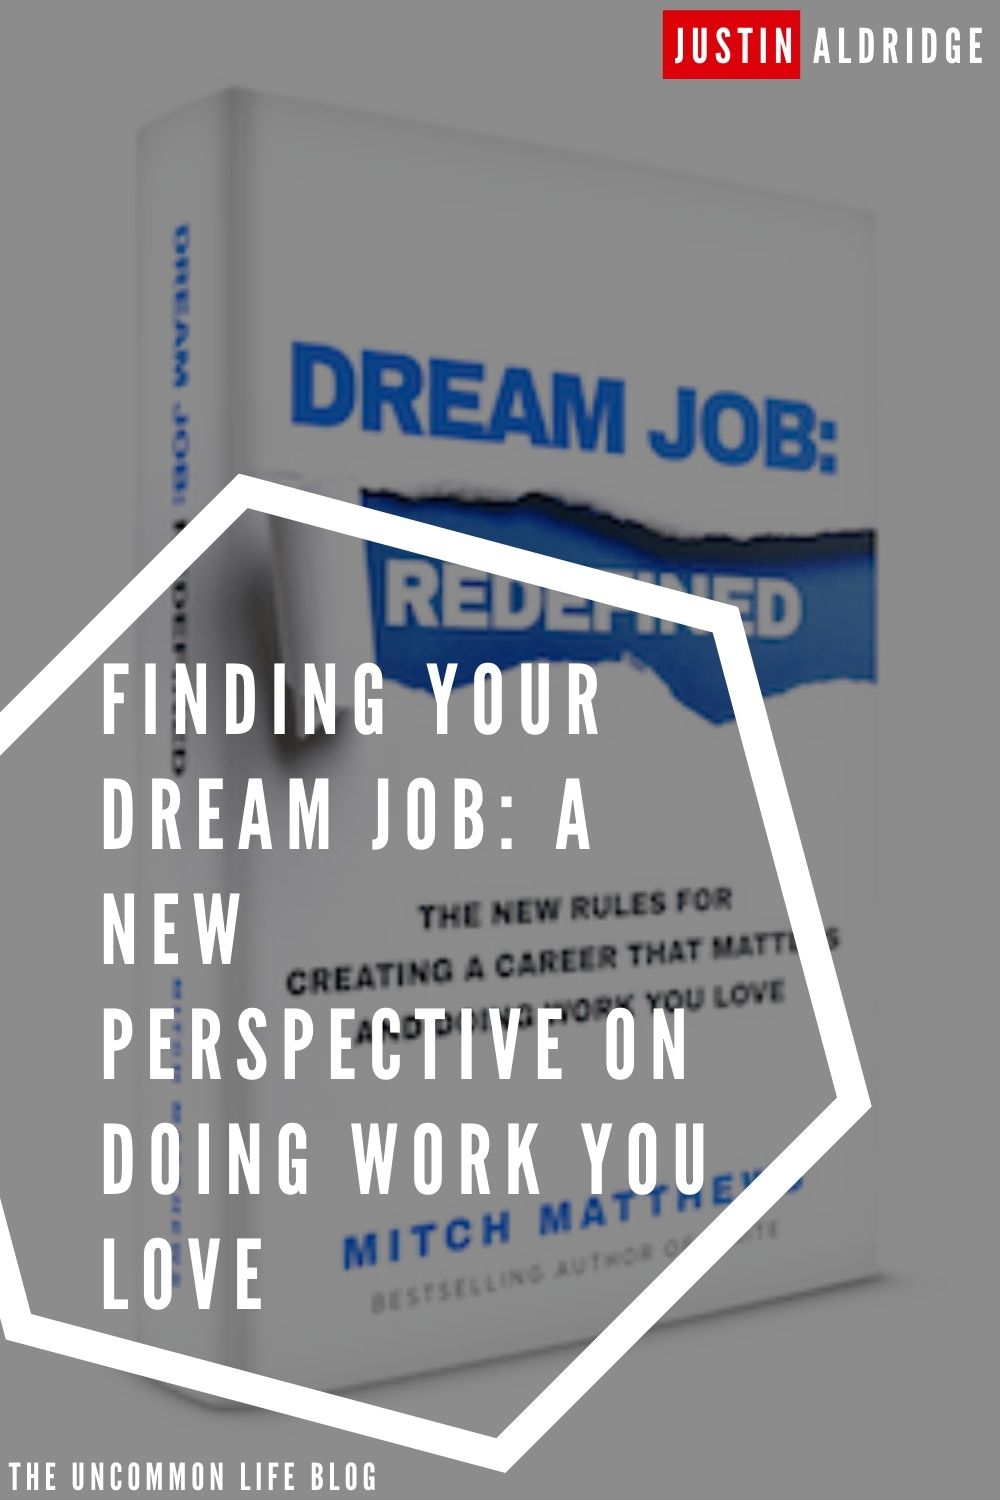 Picture of the book "Dream Job Redefined" in the background behind the text, "Find your dream job: a new perspective on doing work you love"